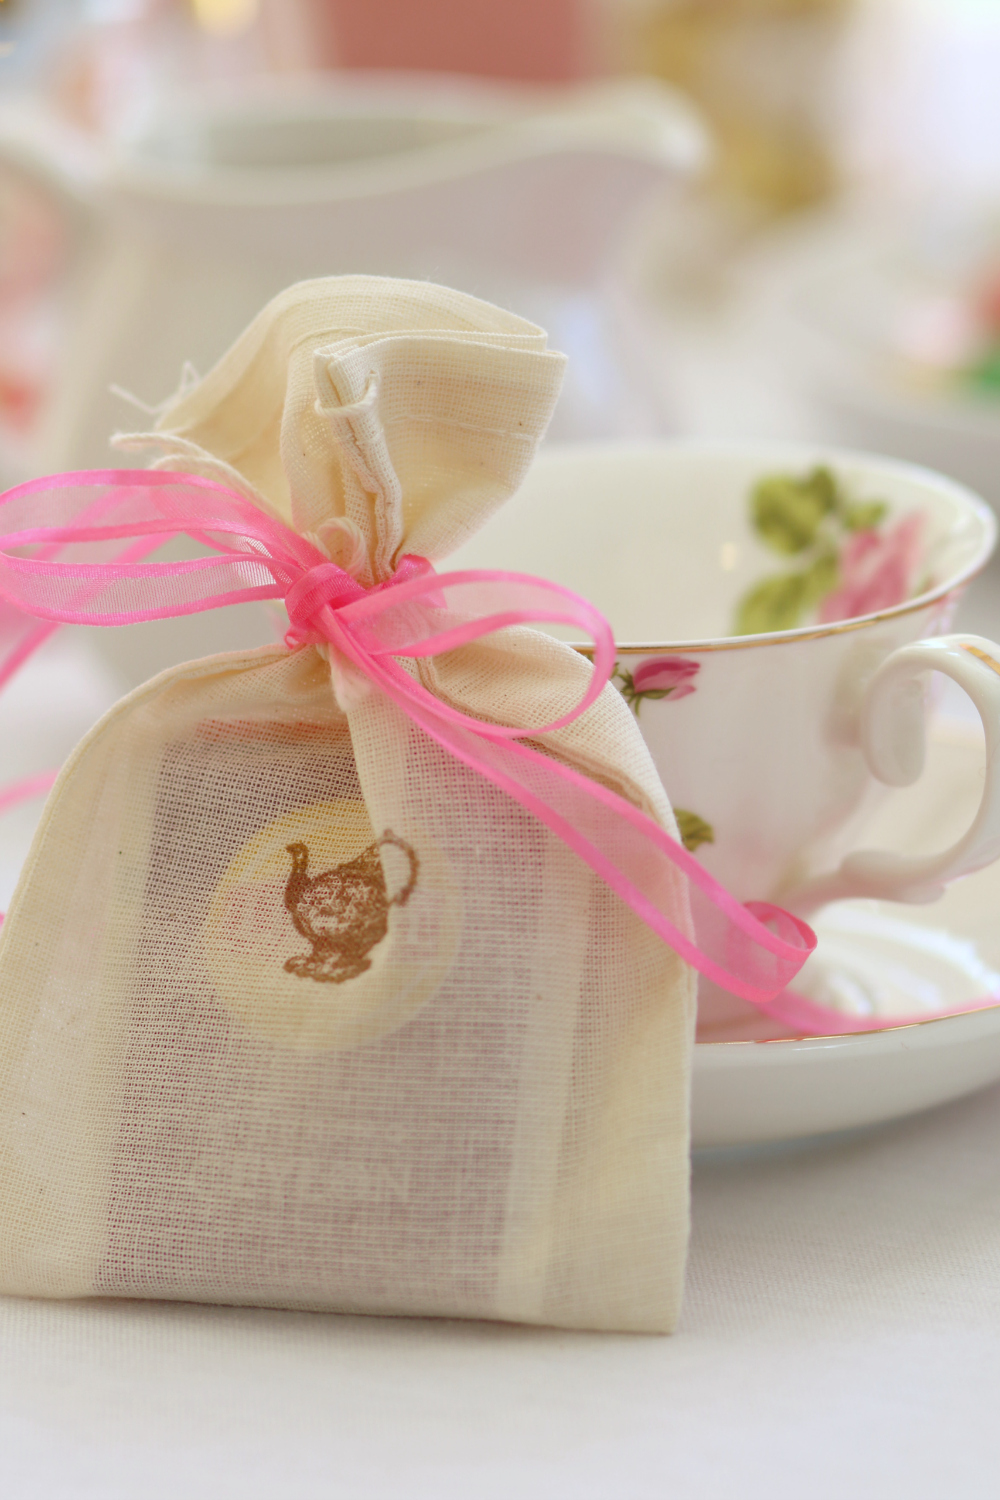 how to host an intimate afternoon tea party